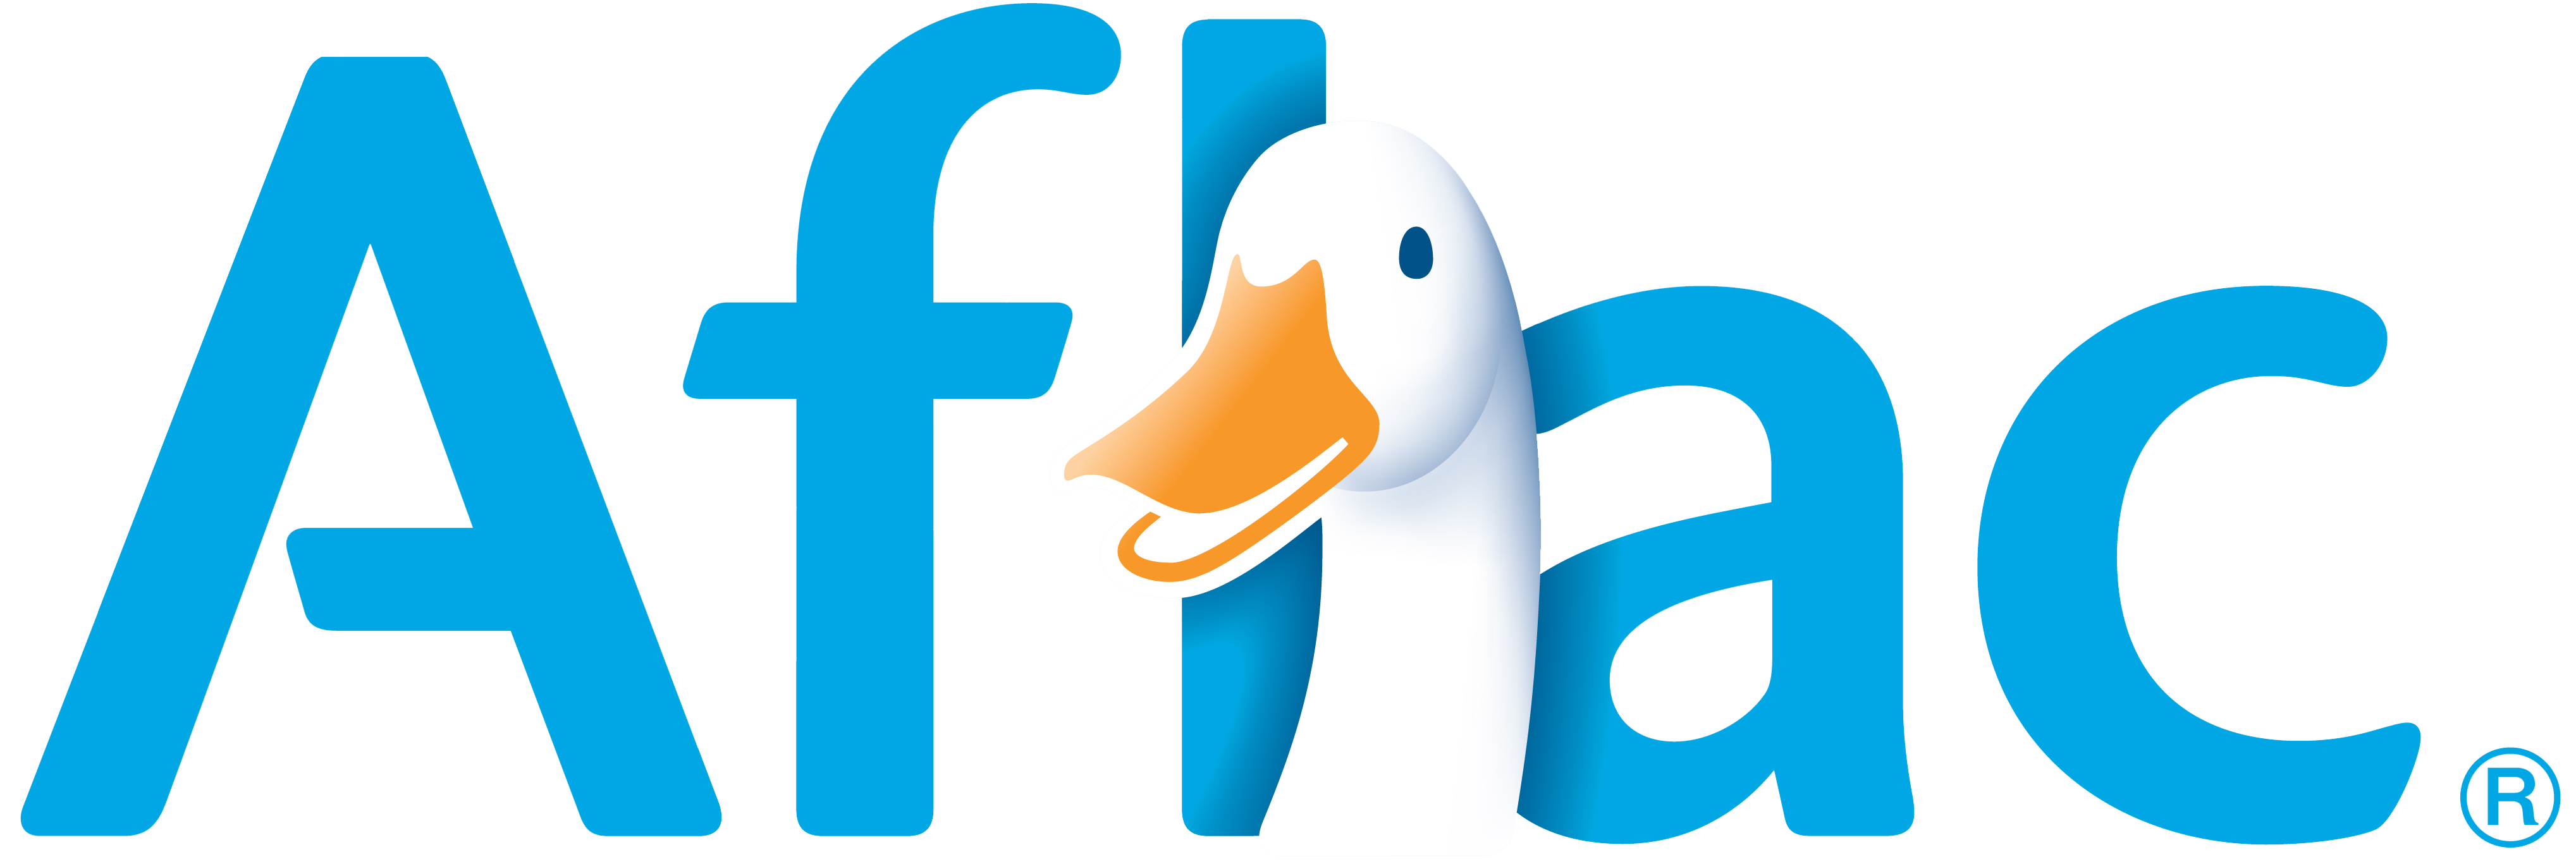 logo for aflac